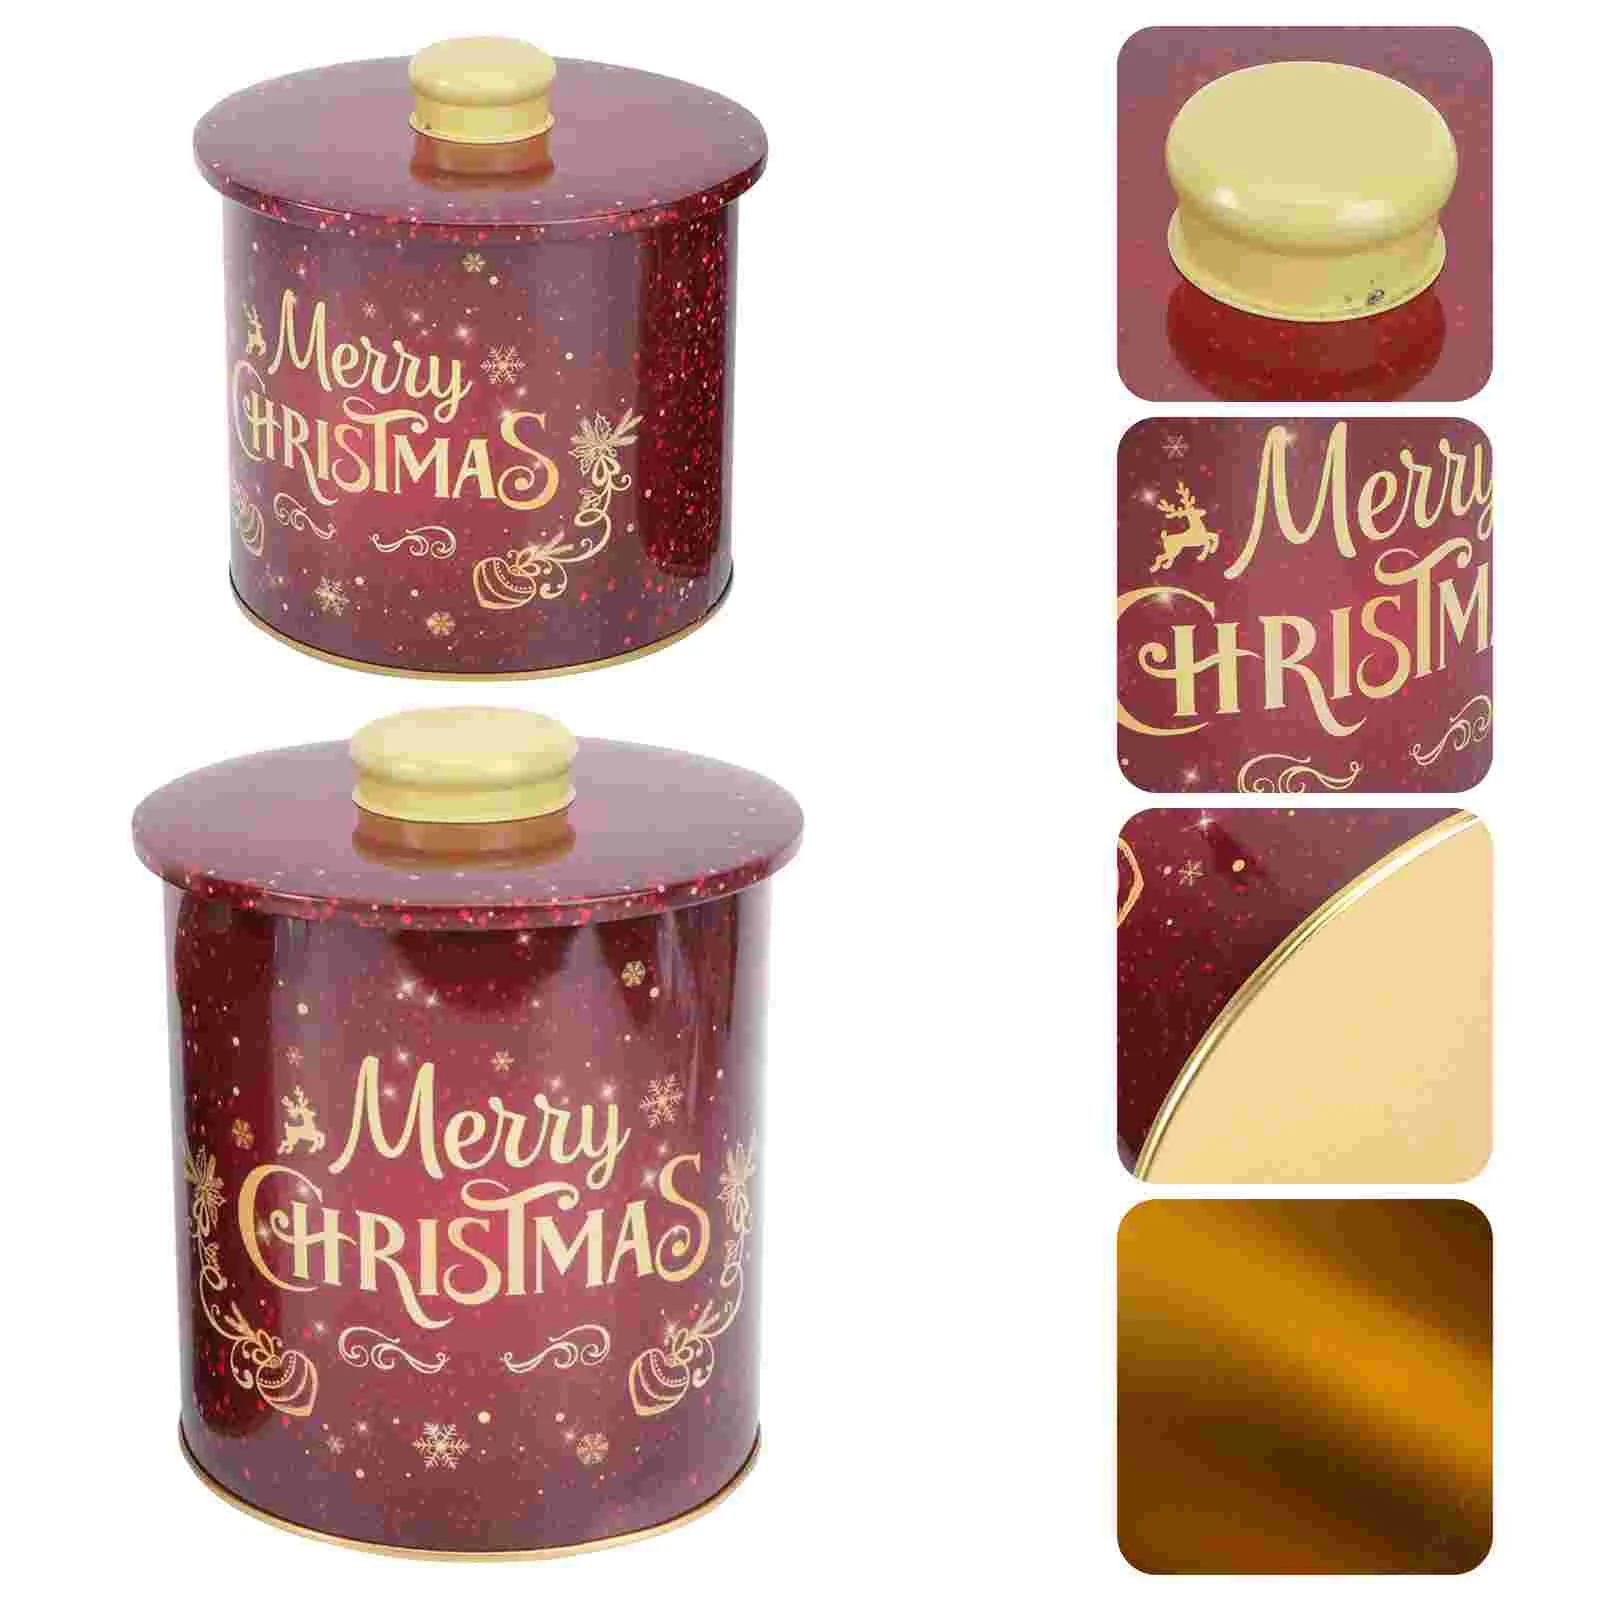 

Holiday Biscuit Jar Christmas Storage Box Coffee Cookies Tinplate Candy Containers